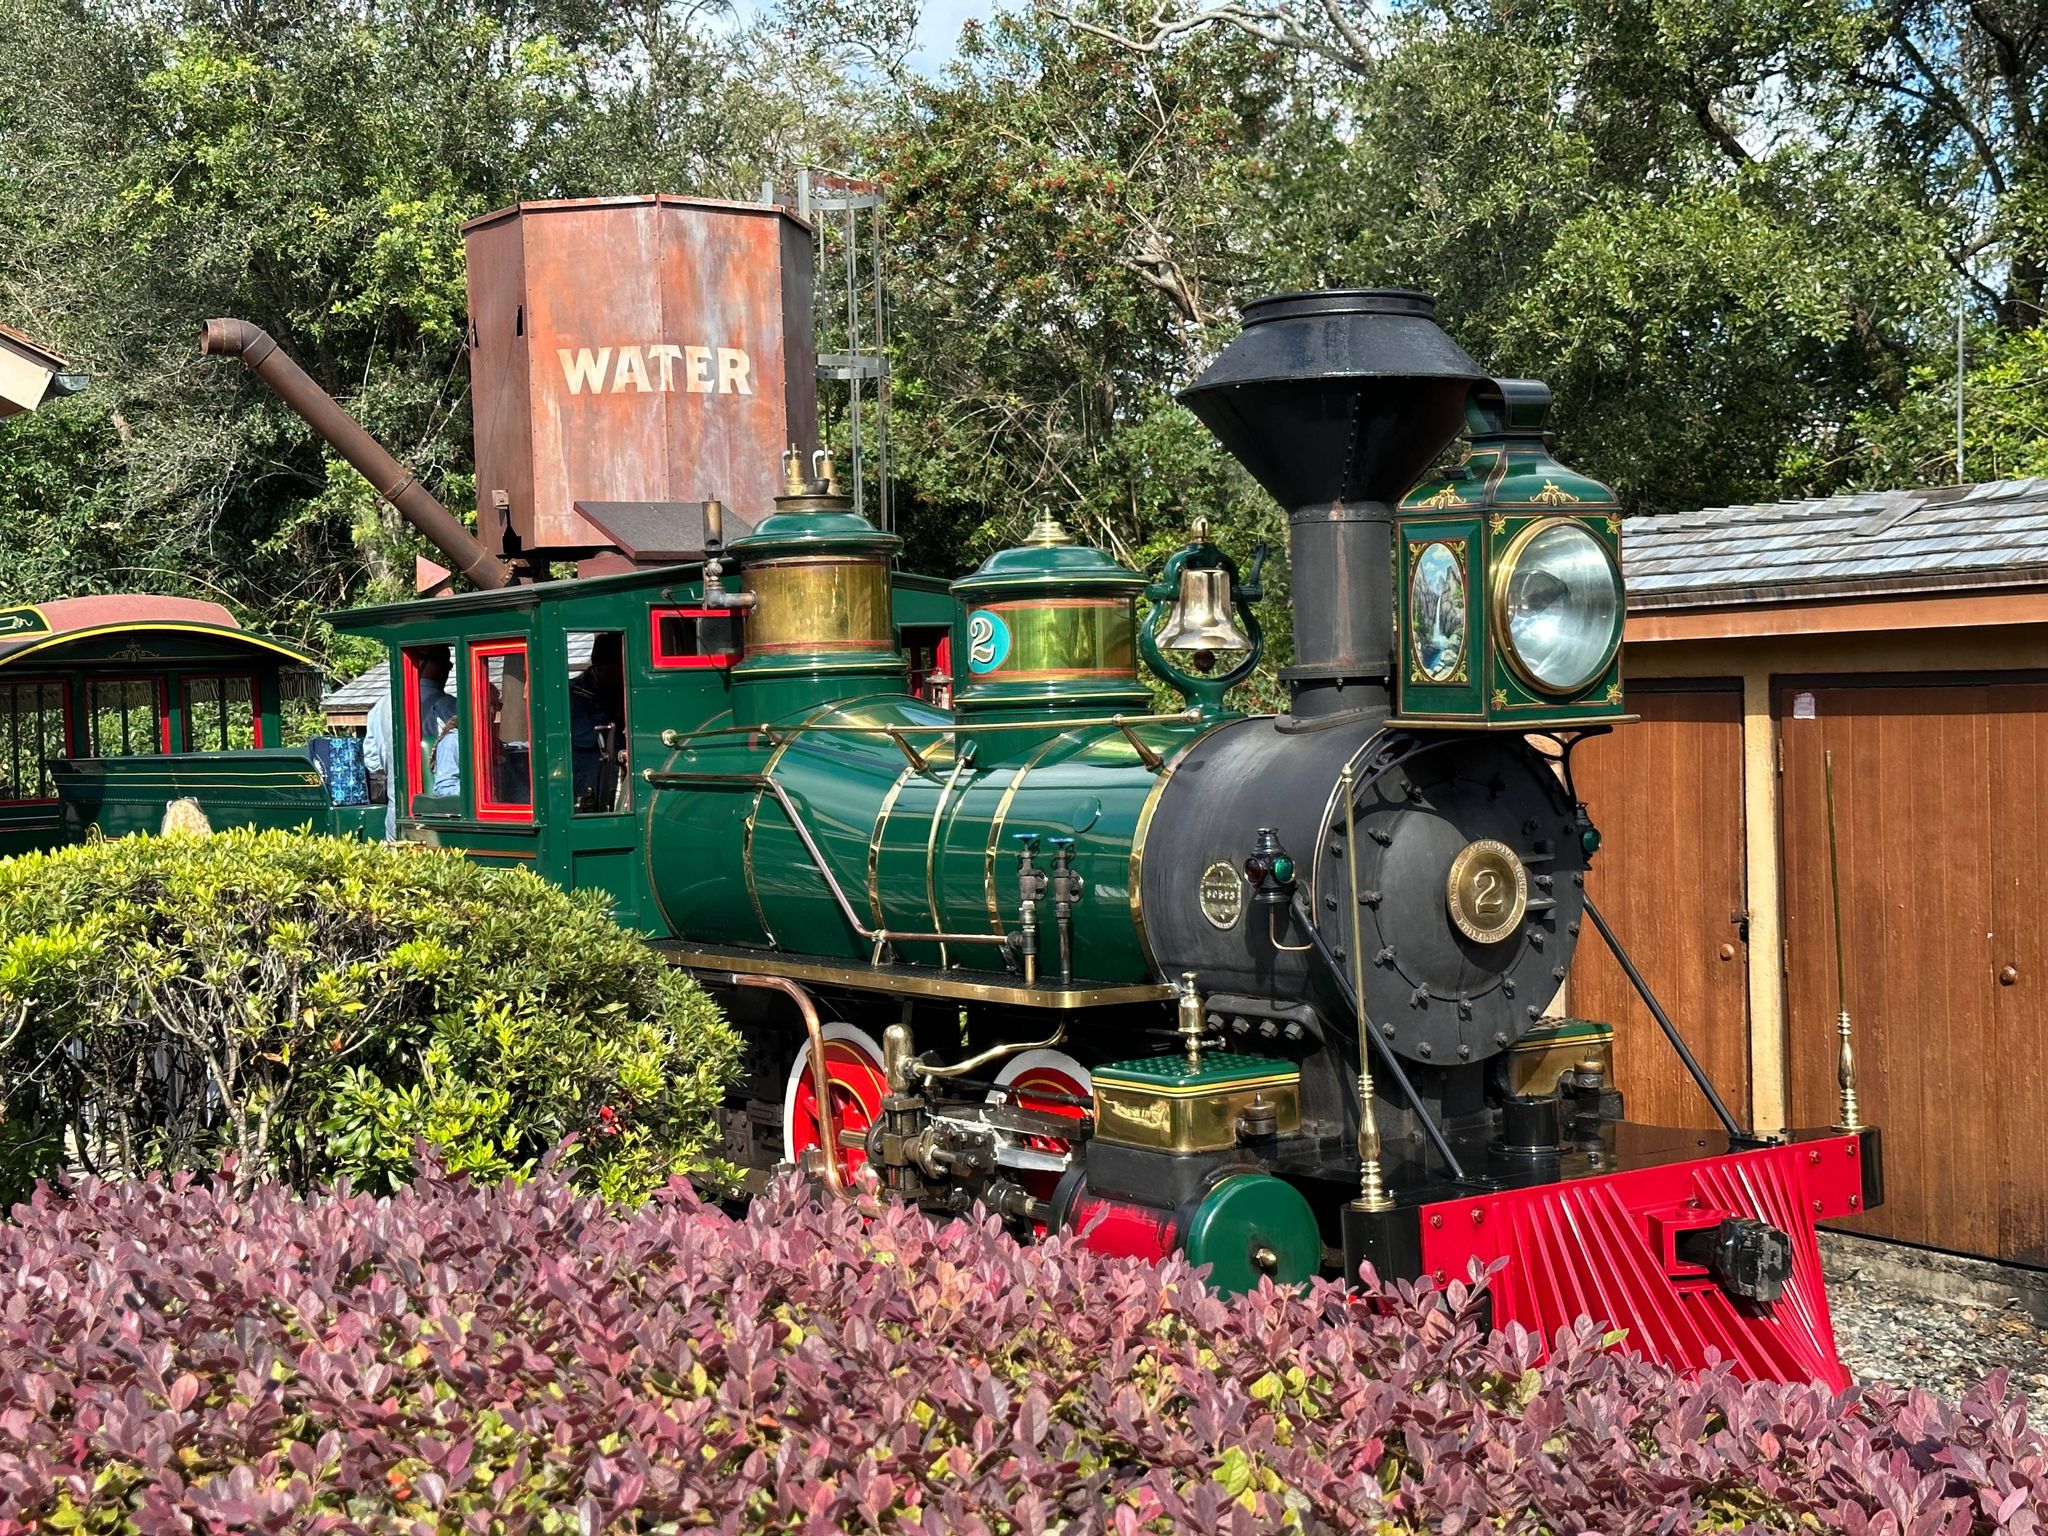 Walt Disney World Railroad is now officially open for all to enjoy